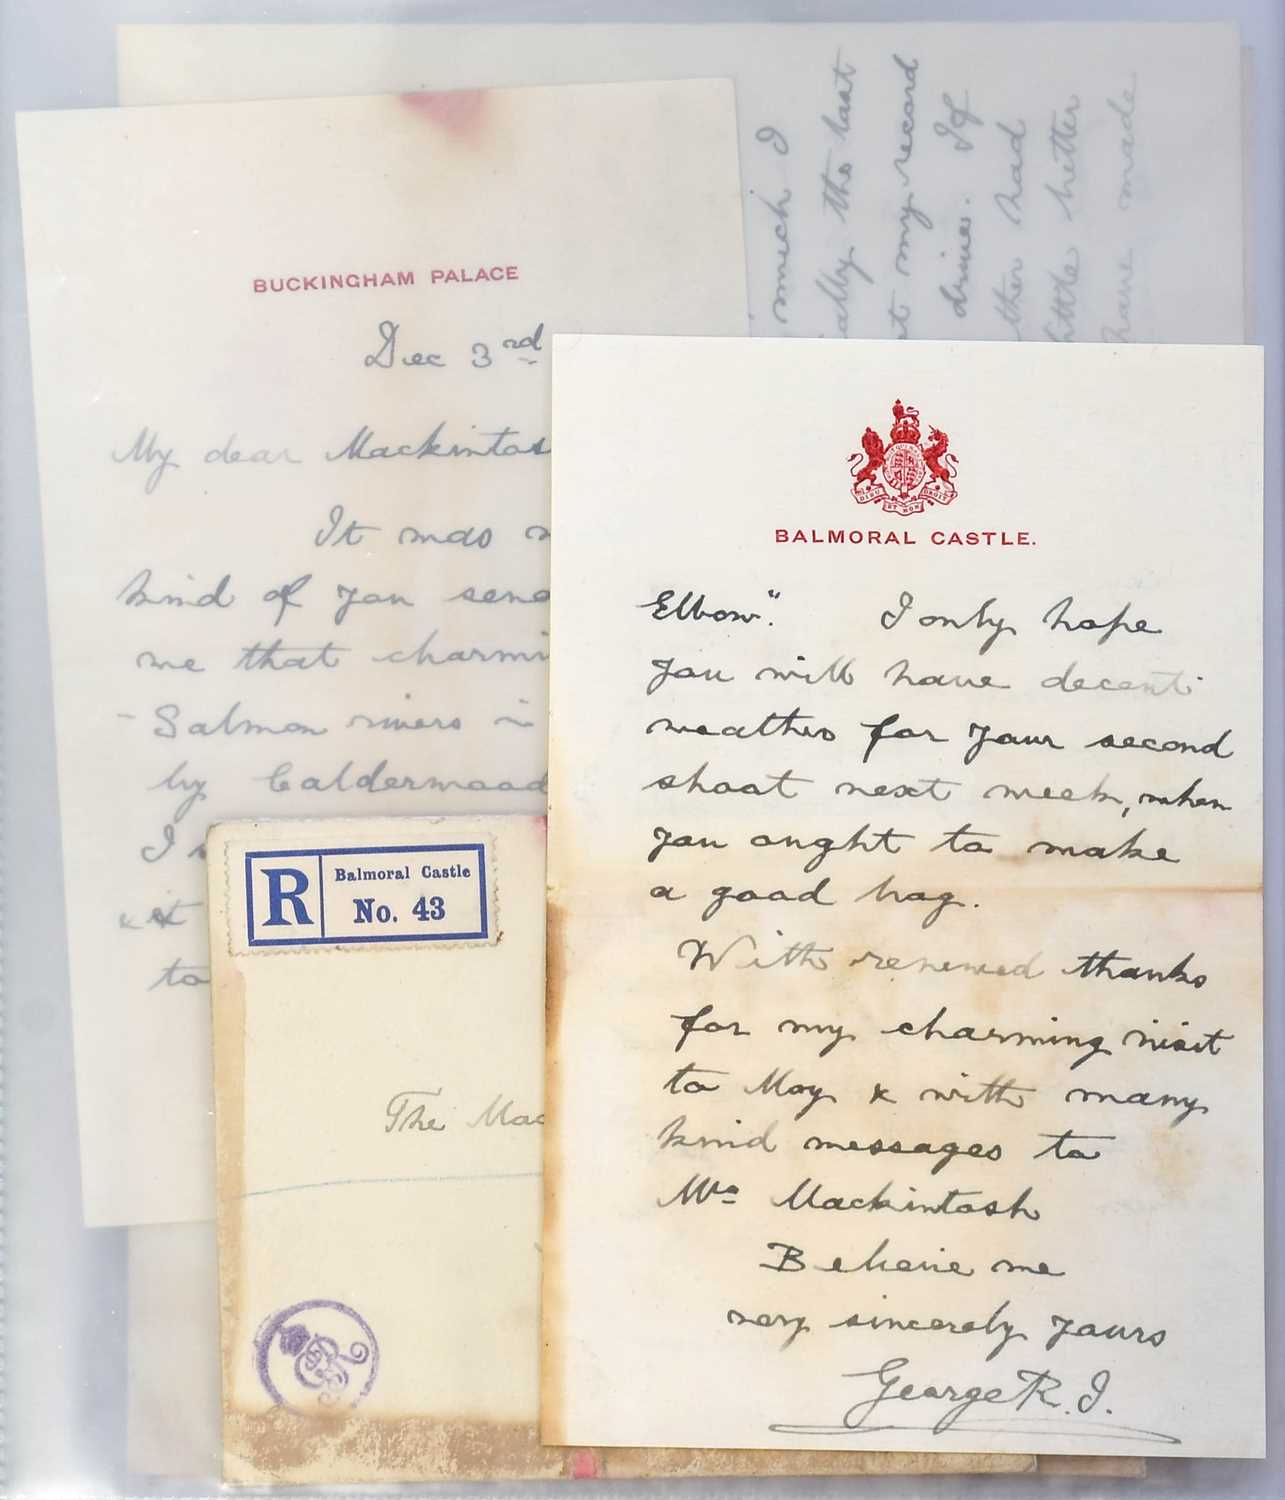 Royal Family Autograph Letters An outstanding archive of letters written to The Mackintosh of